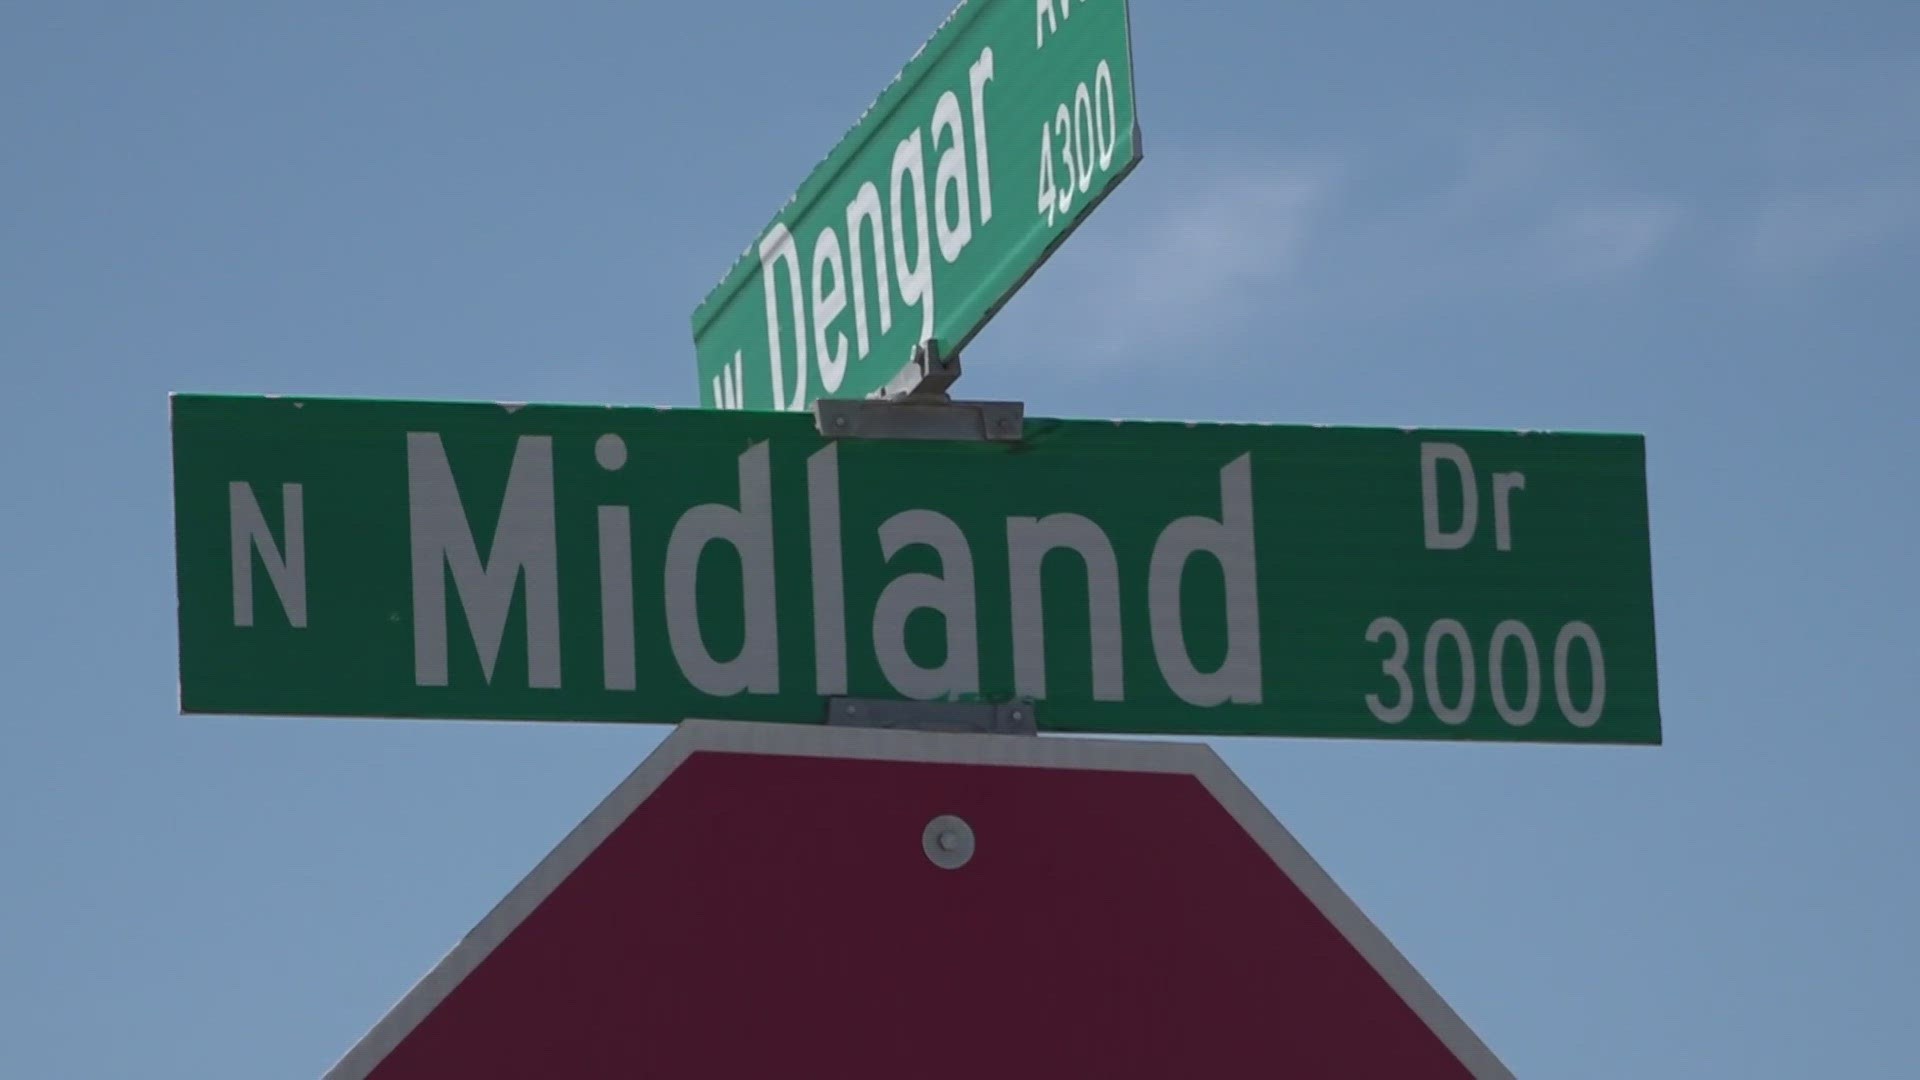 The victim said that the suspect was forcefully knocking on his door in the 3000 block of North Midland Drive around 1:48 a.m. No information about suspect released.